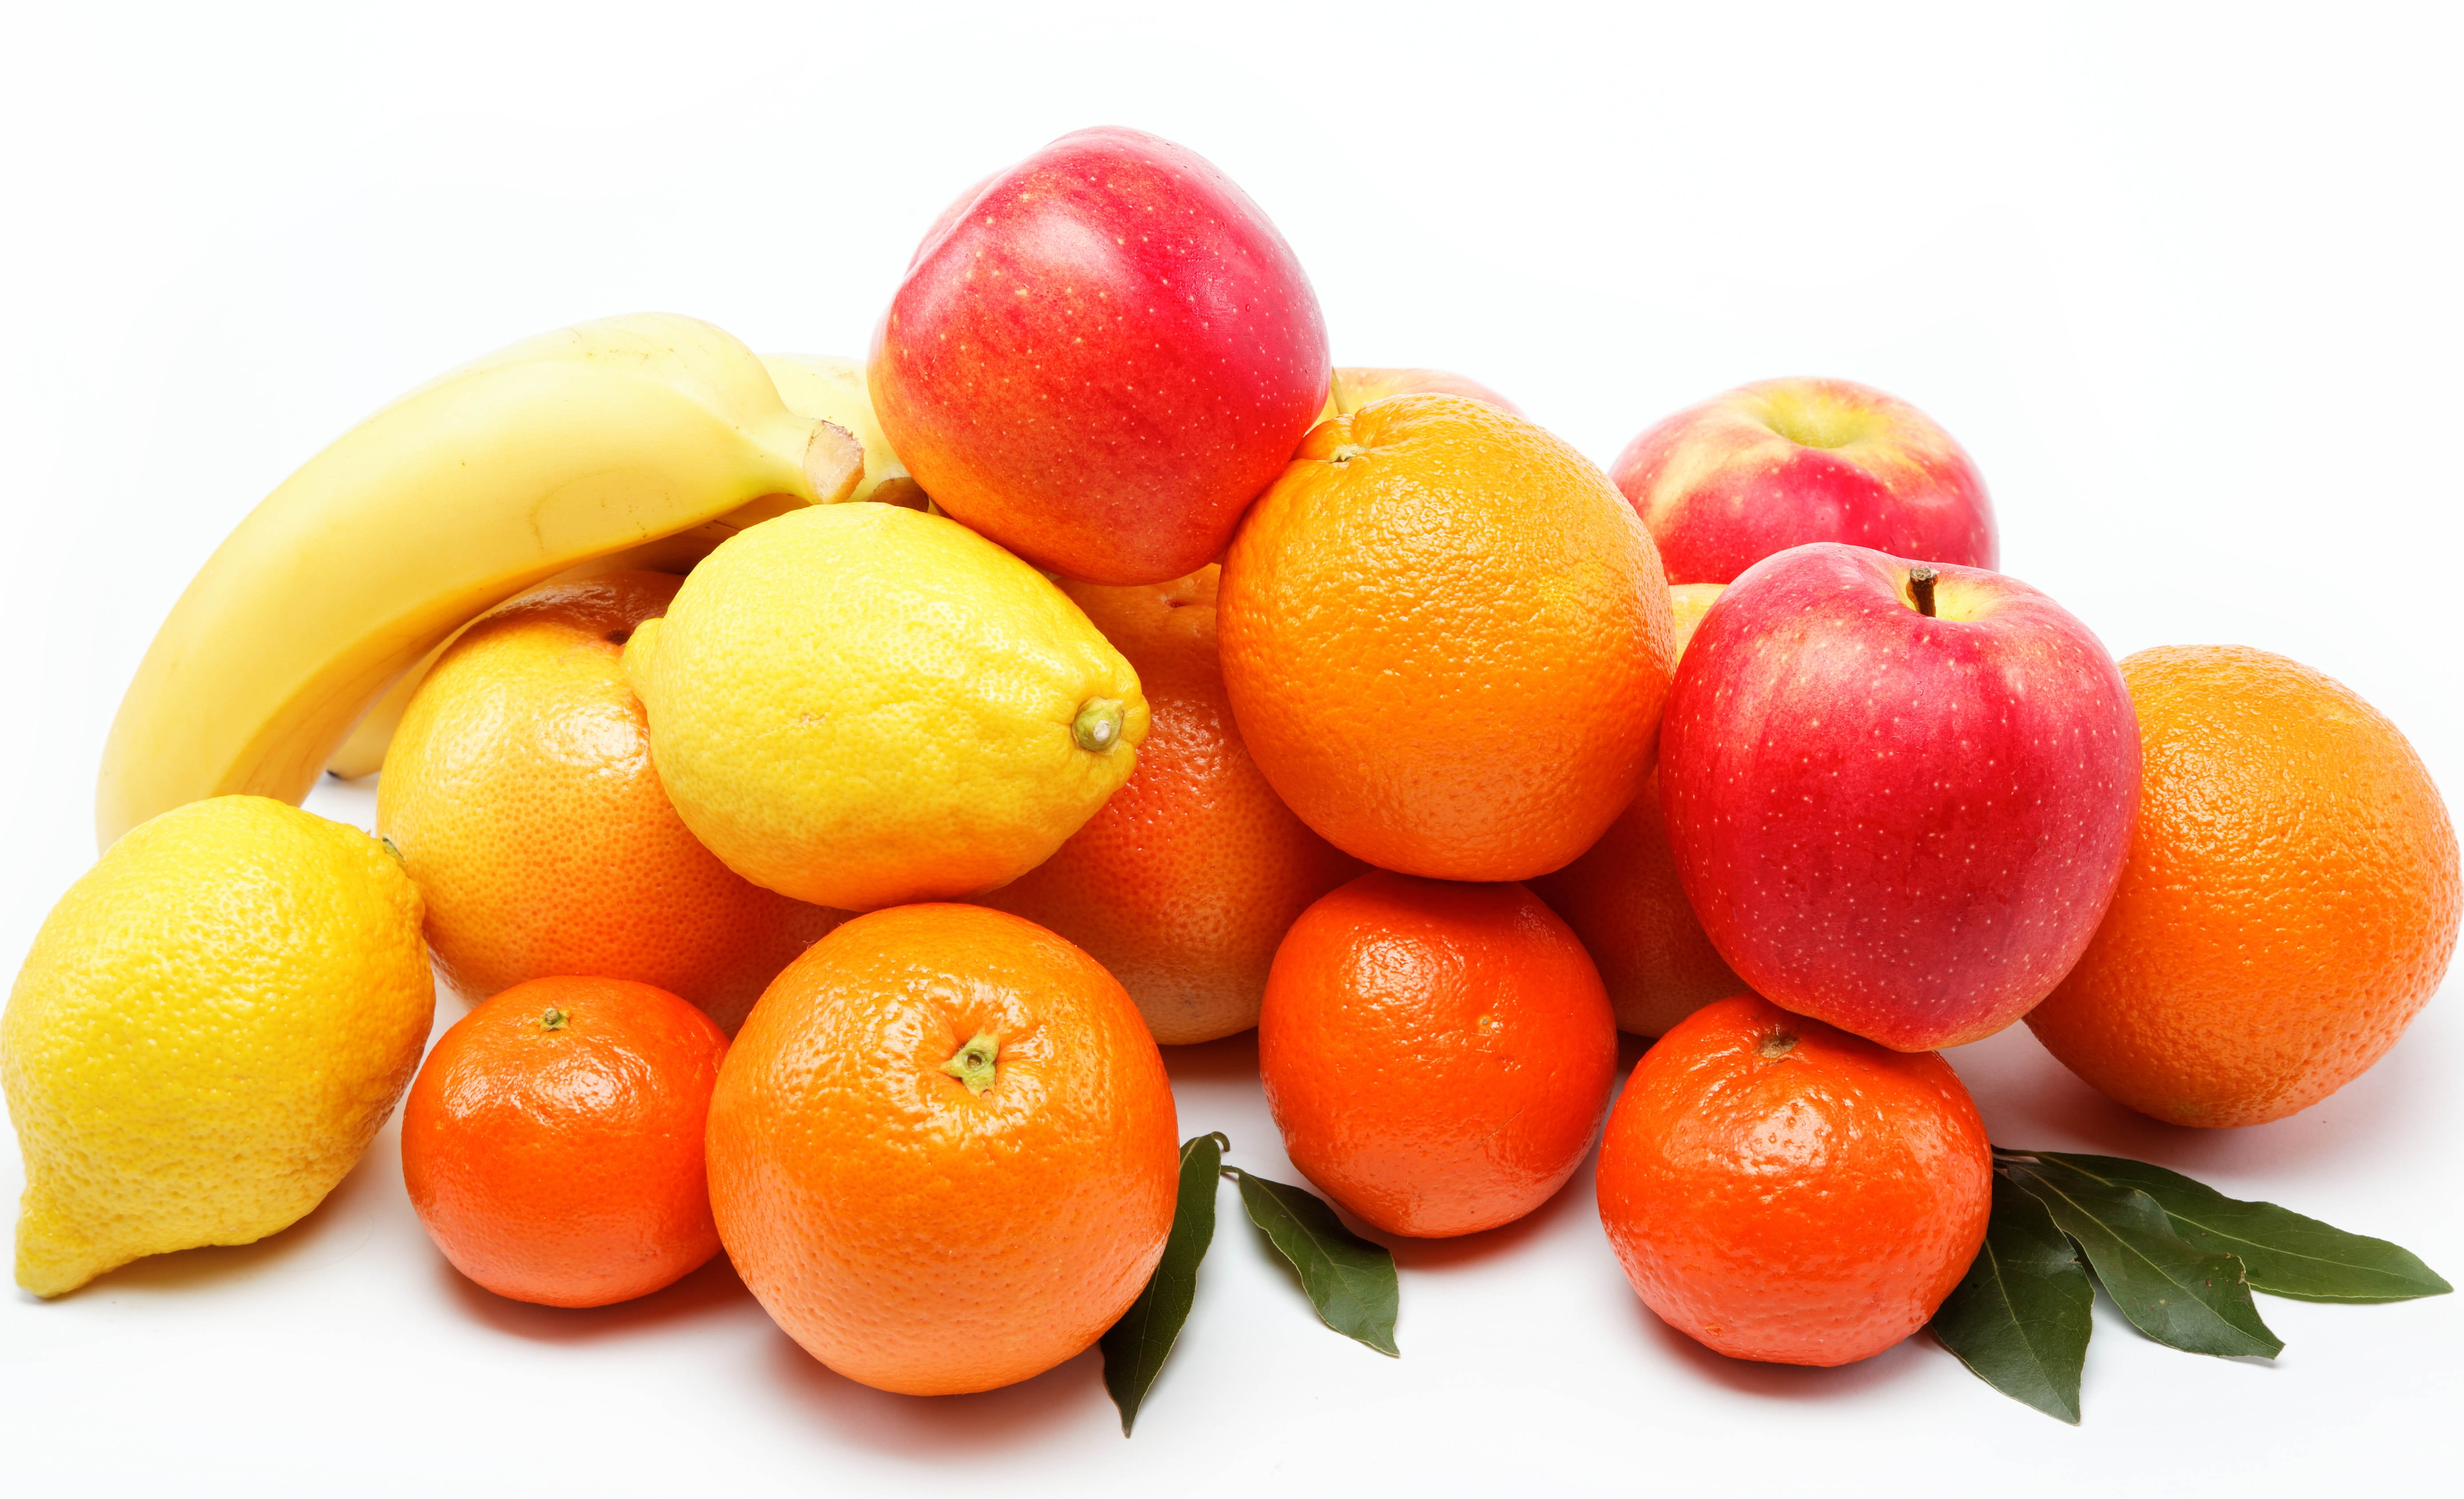 1080x1920 Resolution Red Apples Orange Fruits And Limes With